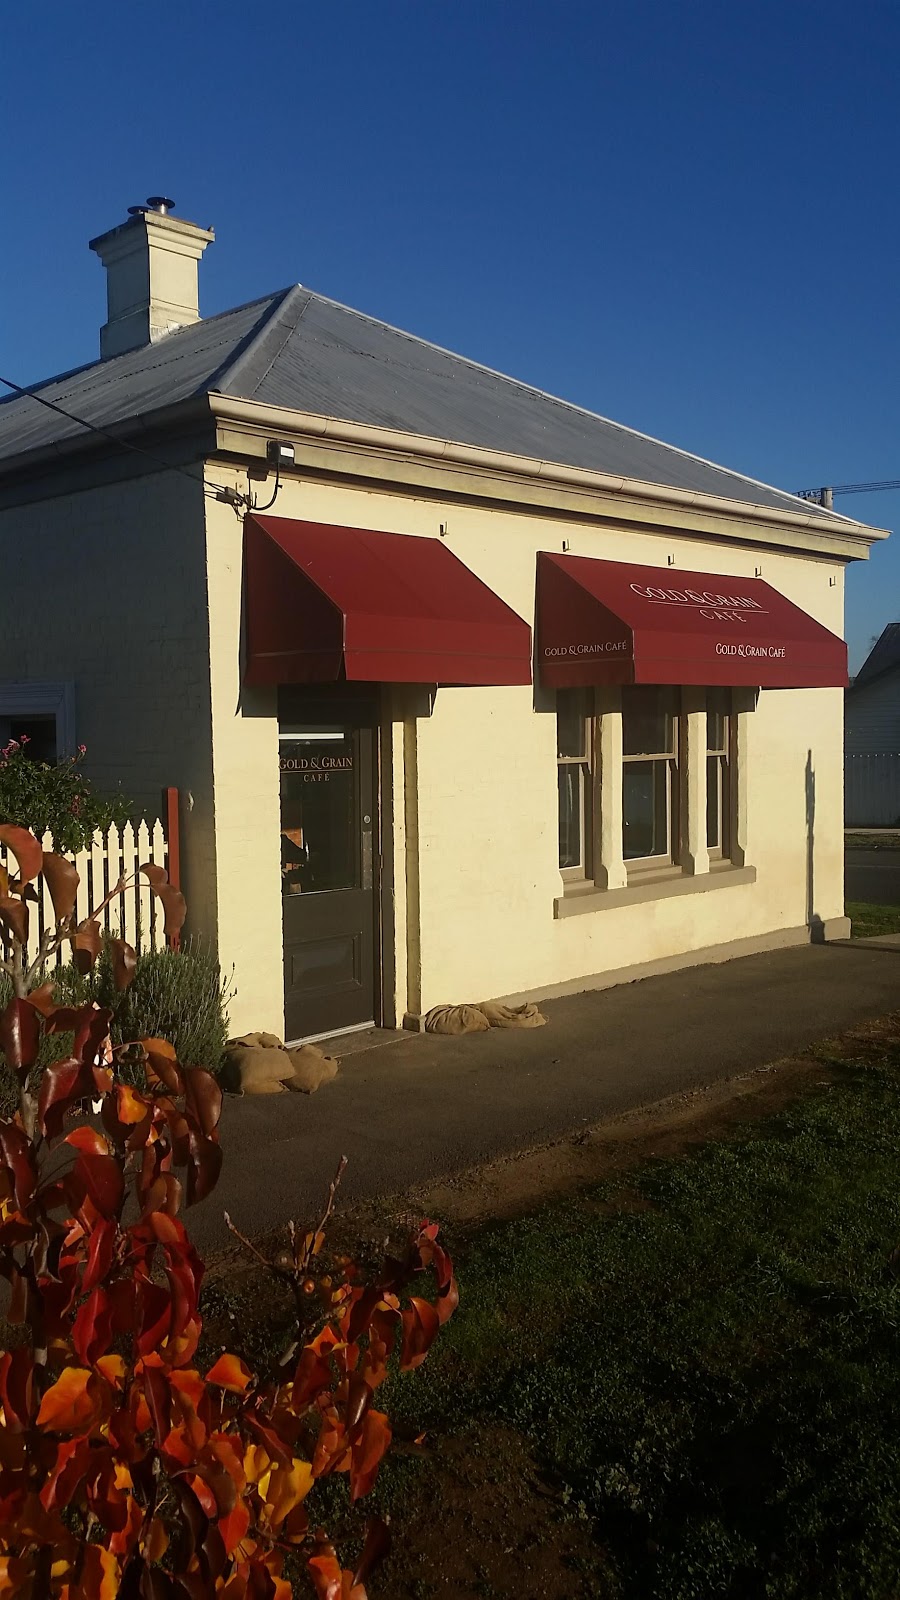 Gold and Grain cafe | cafe | 71 Broadway, Dunolly VIC 3472, Australia | 0447796303 OR +61 447 796 303